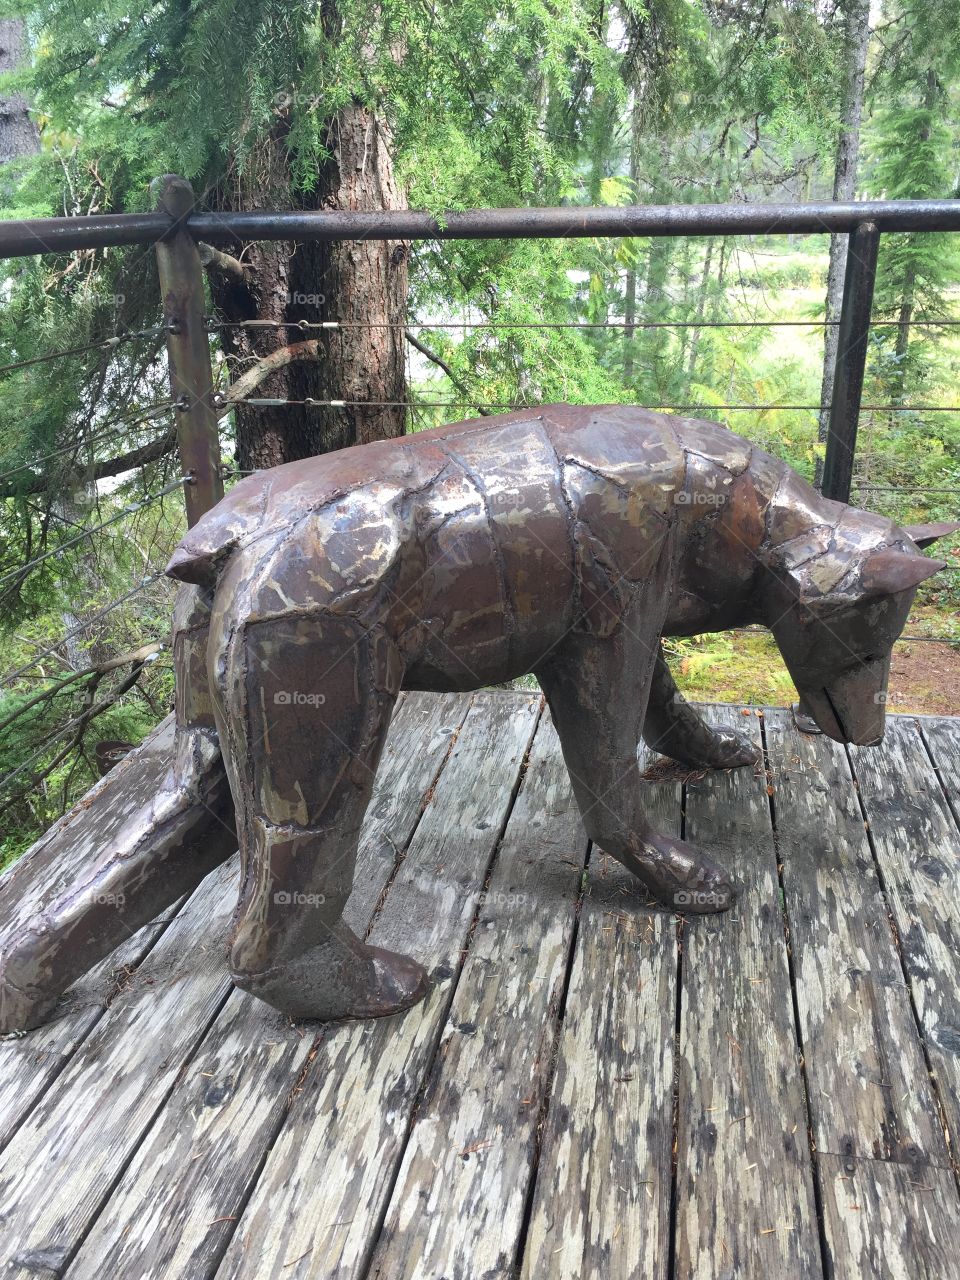 Sculpture of a bear at Pinecrest Estates in beautiful BC!